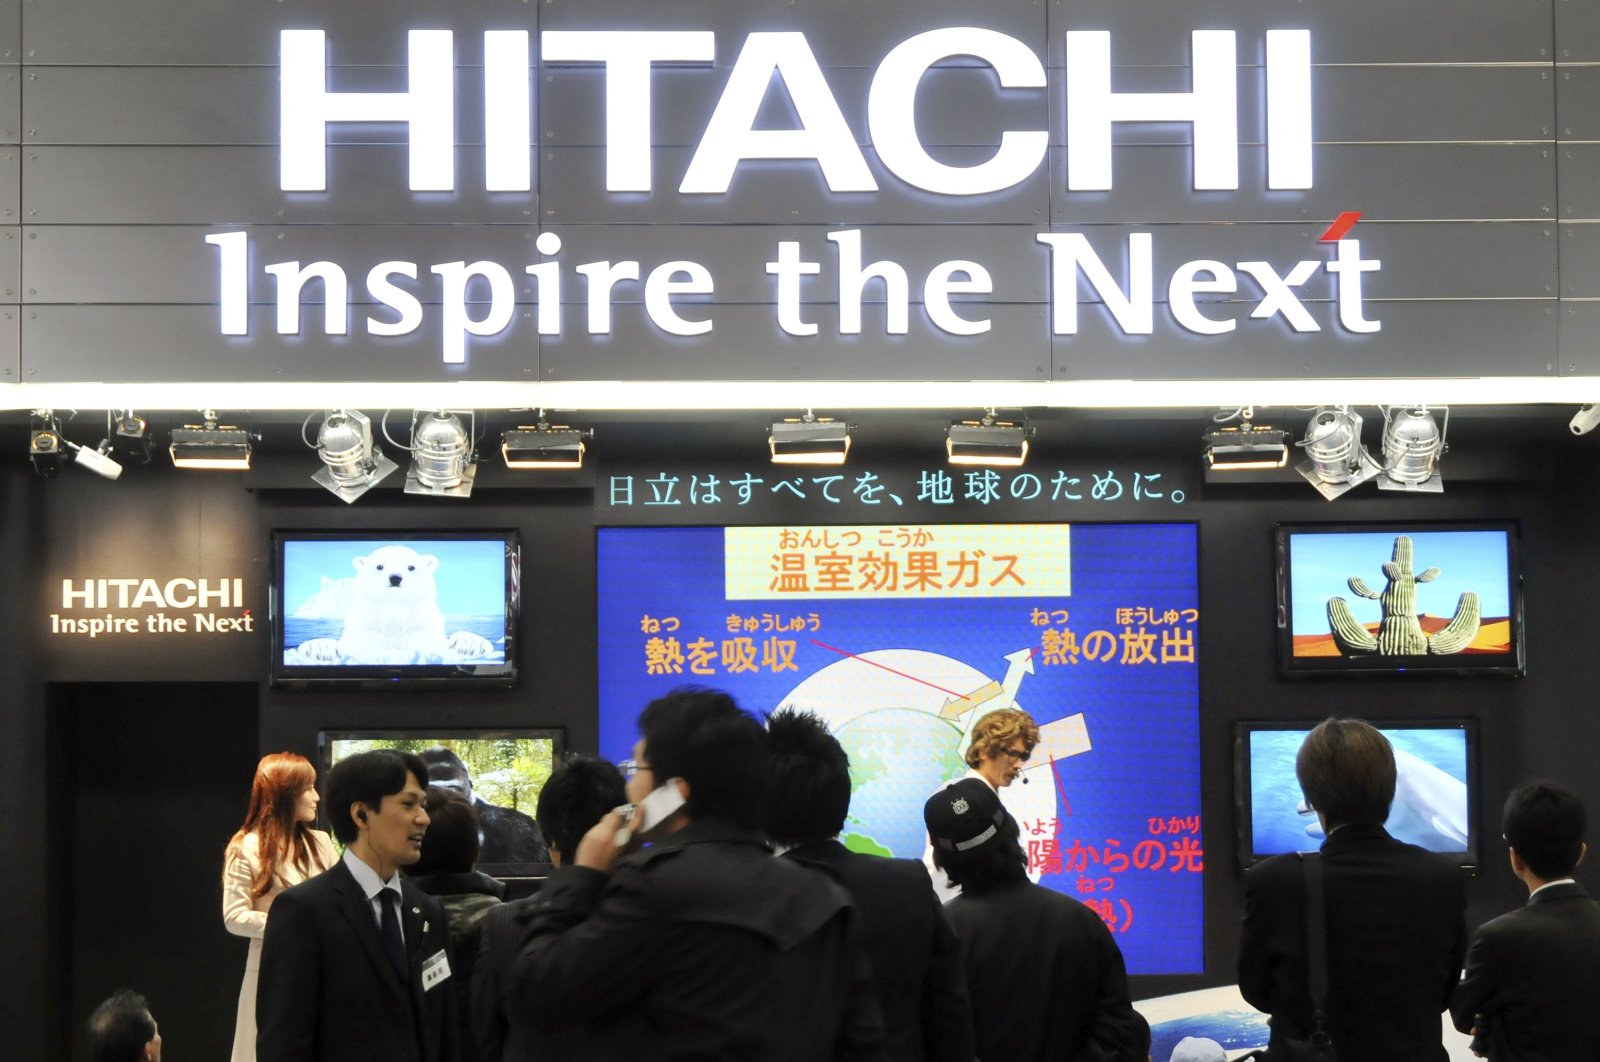 Visitors crowd at a booth of Japanese electronics maker Hitachi Ltd. at an ecology fair in Tokyo, Japan, Dec. 11, 2008. (AP Photo)